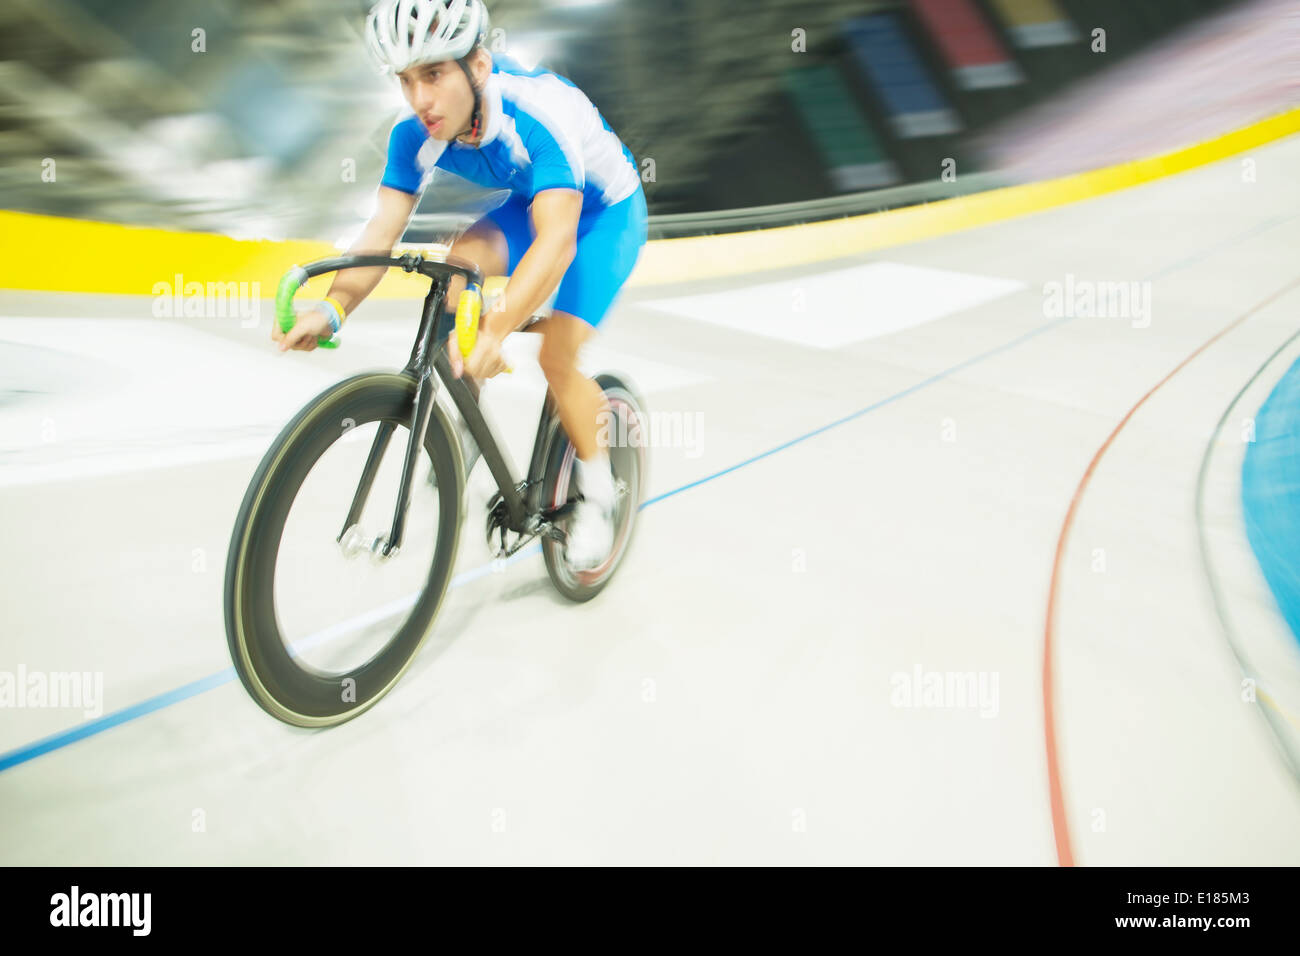 Track cyclist riding in velodrome Banque D'Images